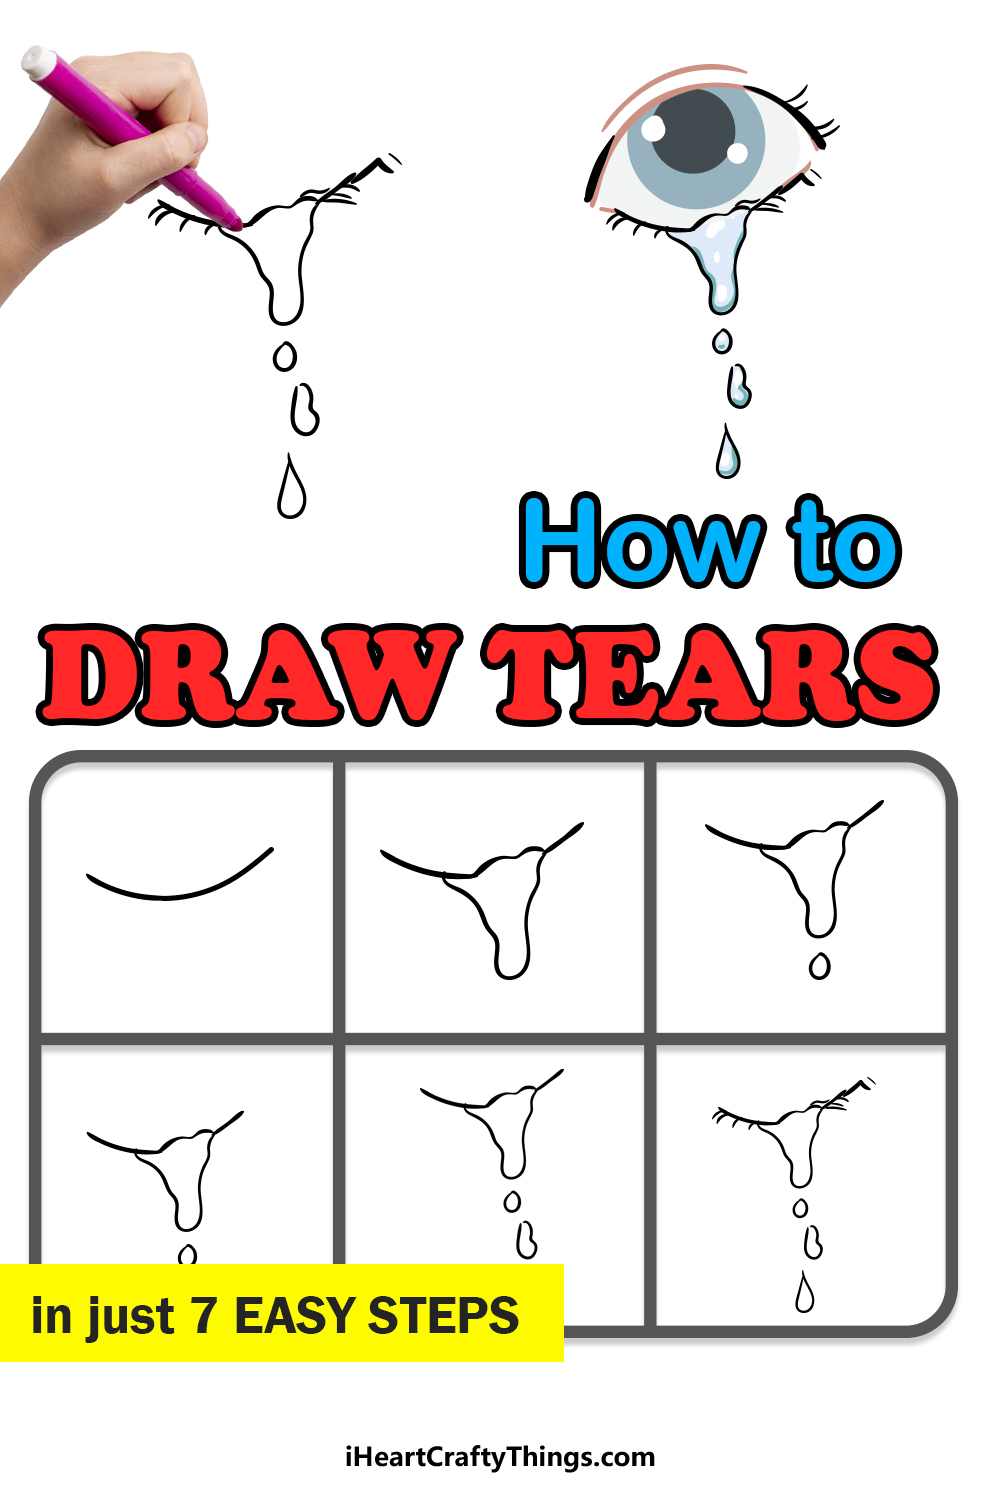 how to draw tears in 7 easy steps